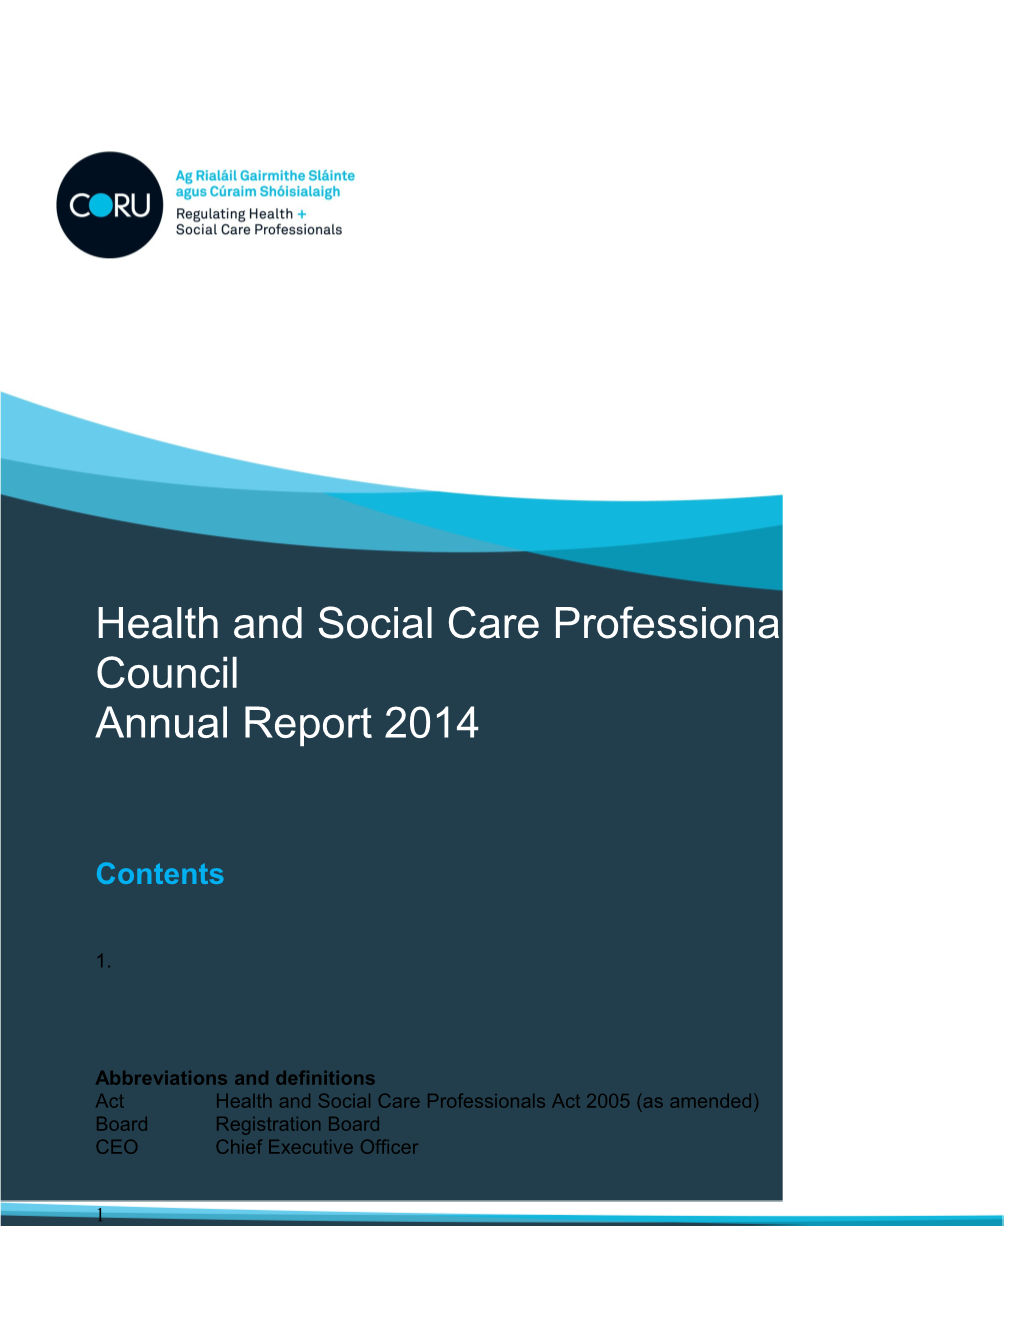 Health and Social Care Professionals Council